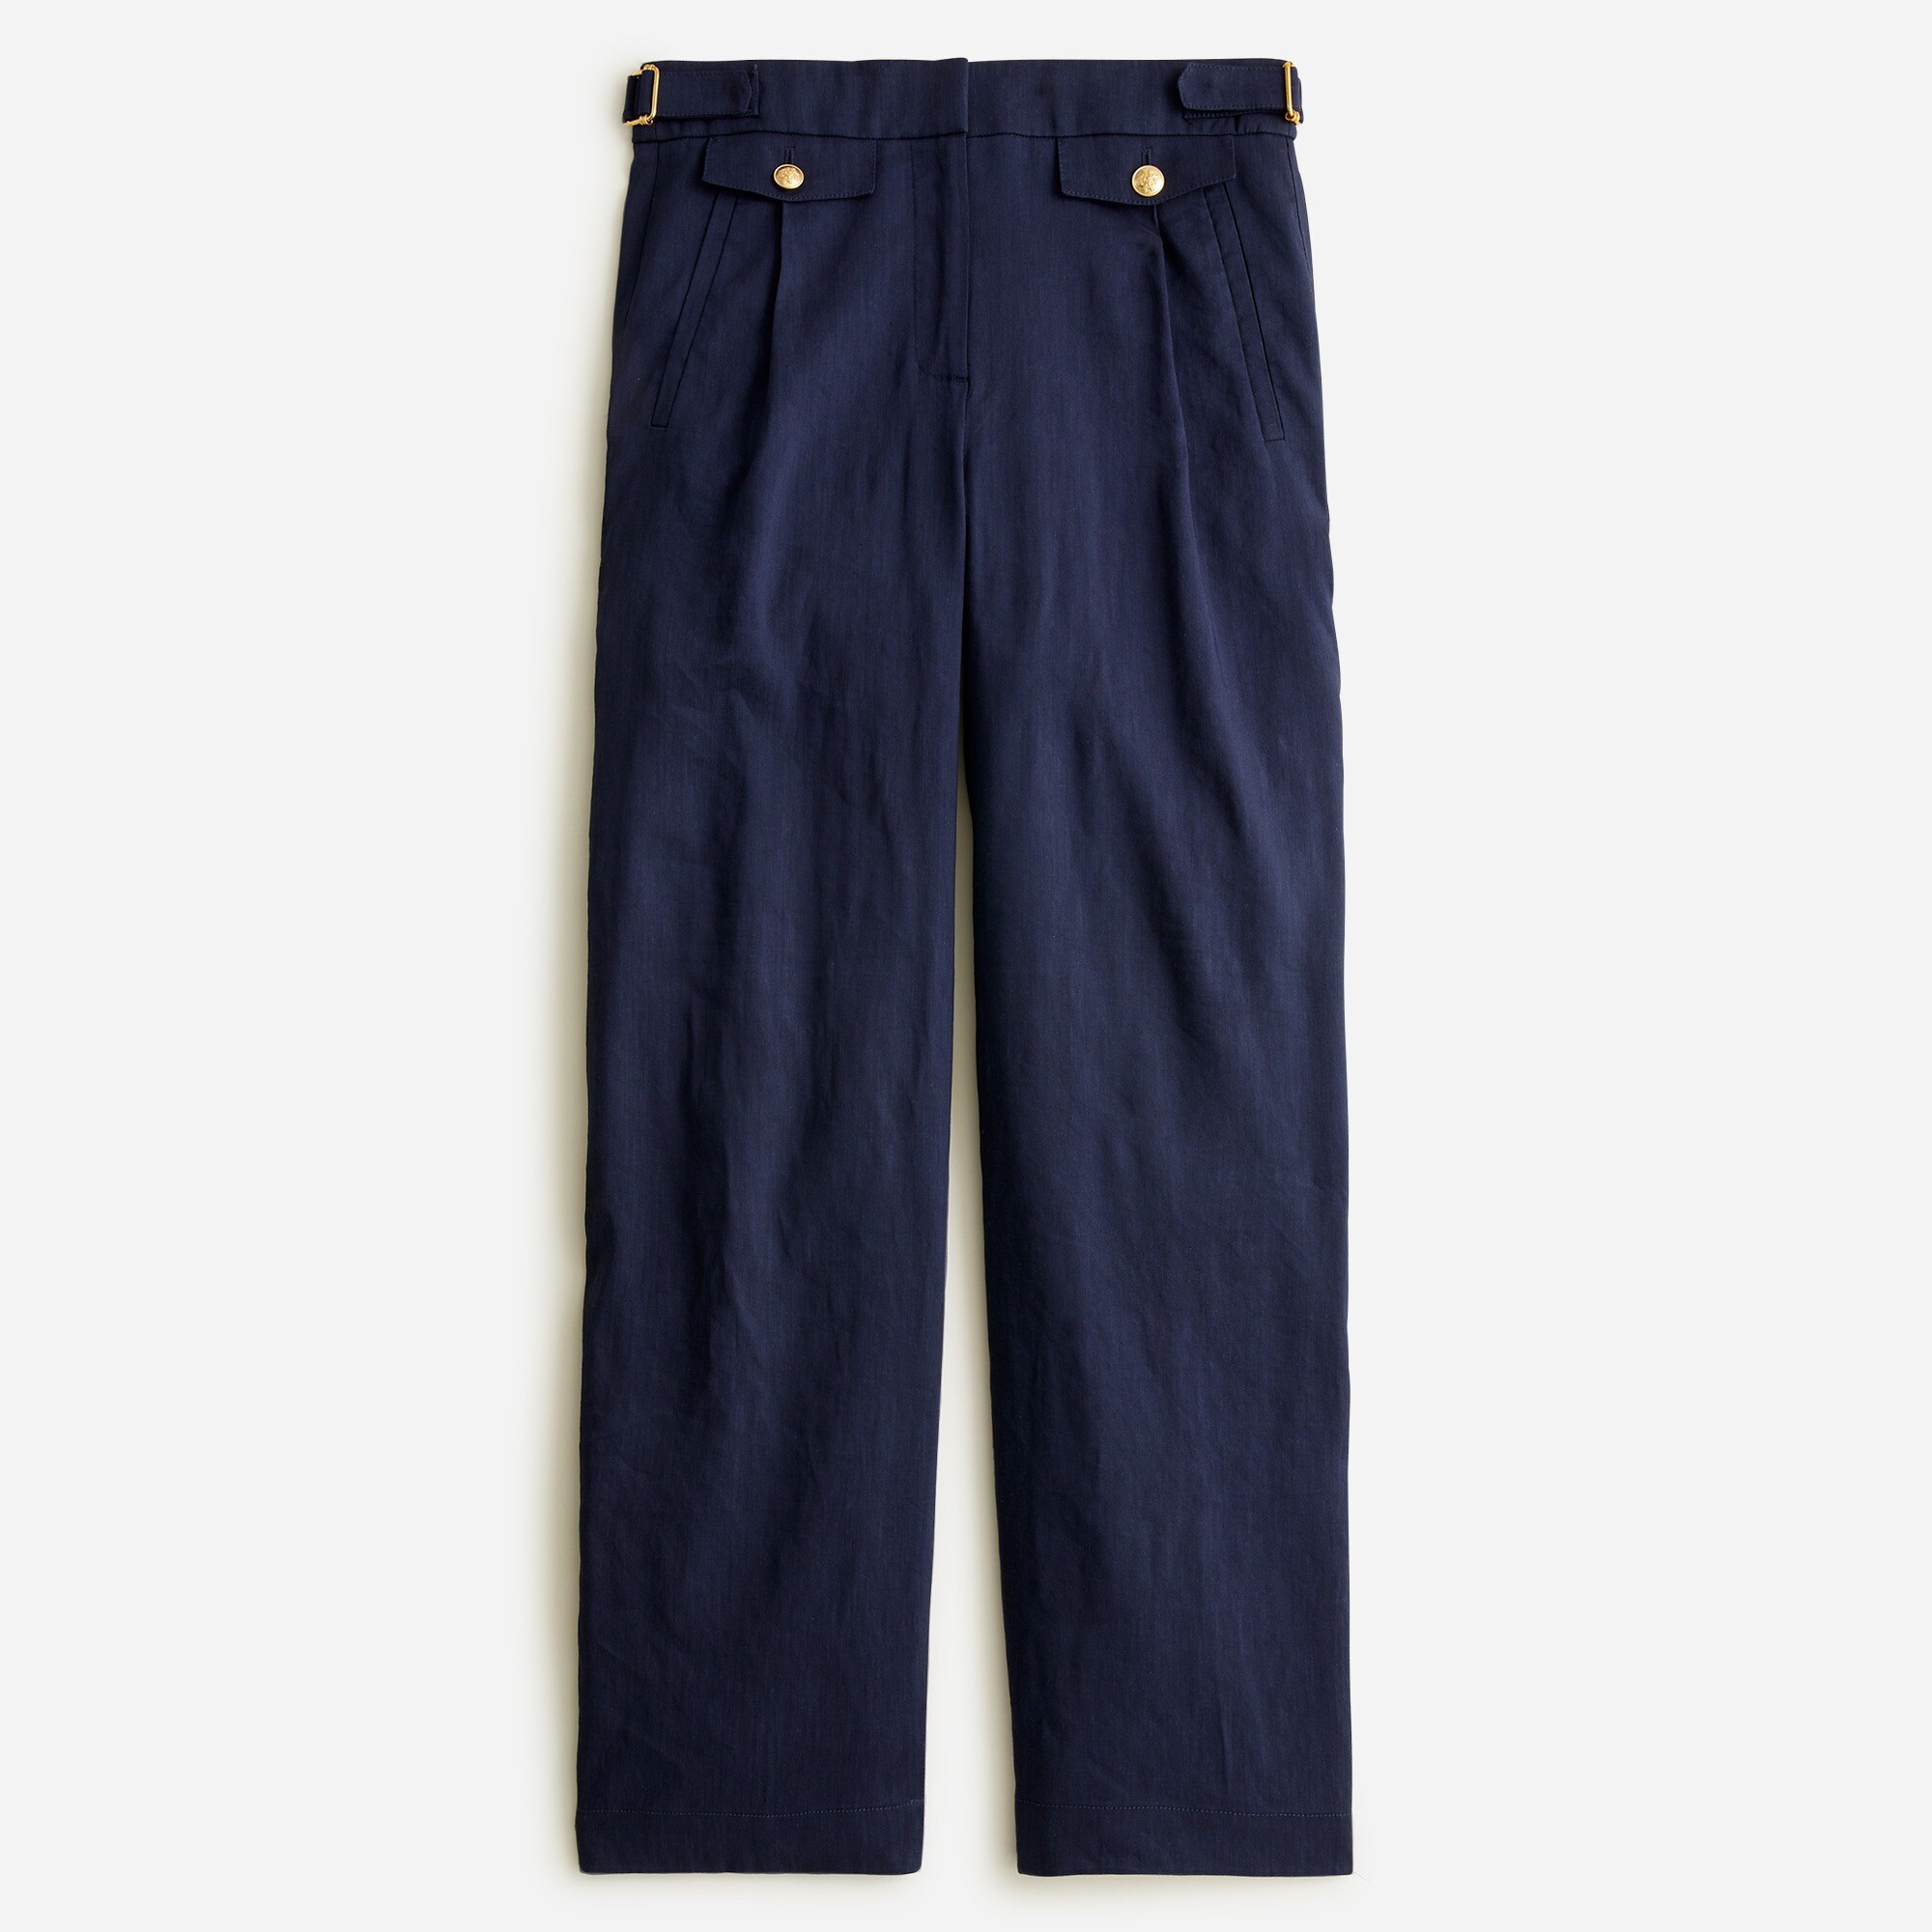  Collection side-tab trouser in Italian linen blend